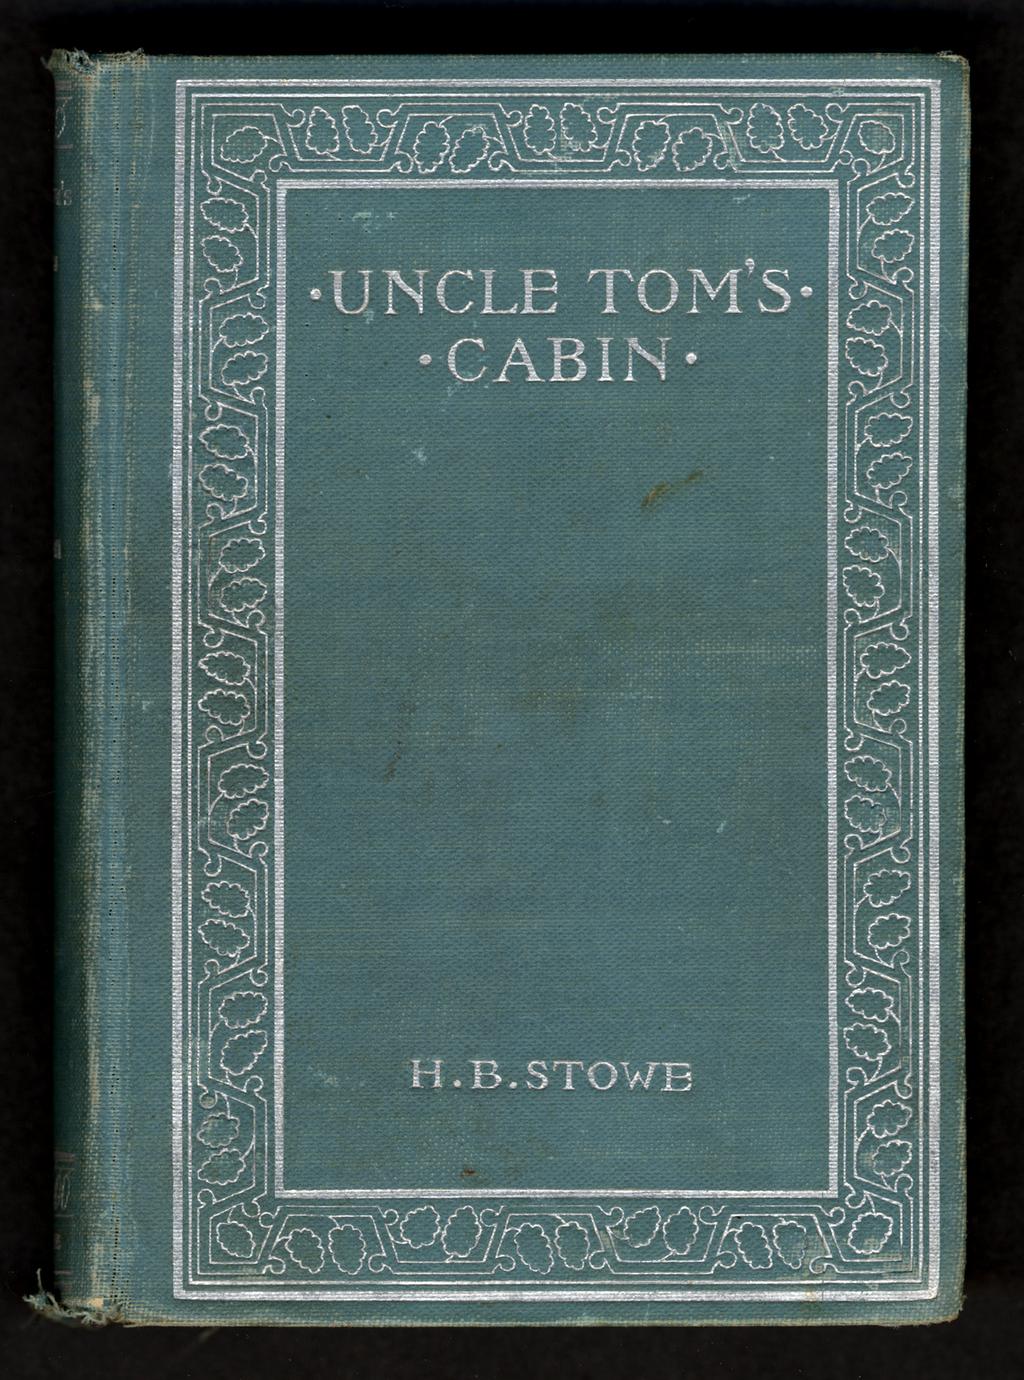 Uncle Tom's cabin; or, Life among the lowly (1 of 2)